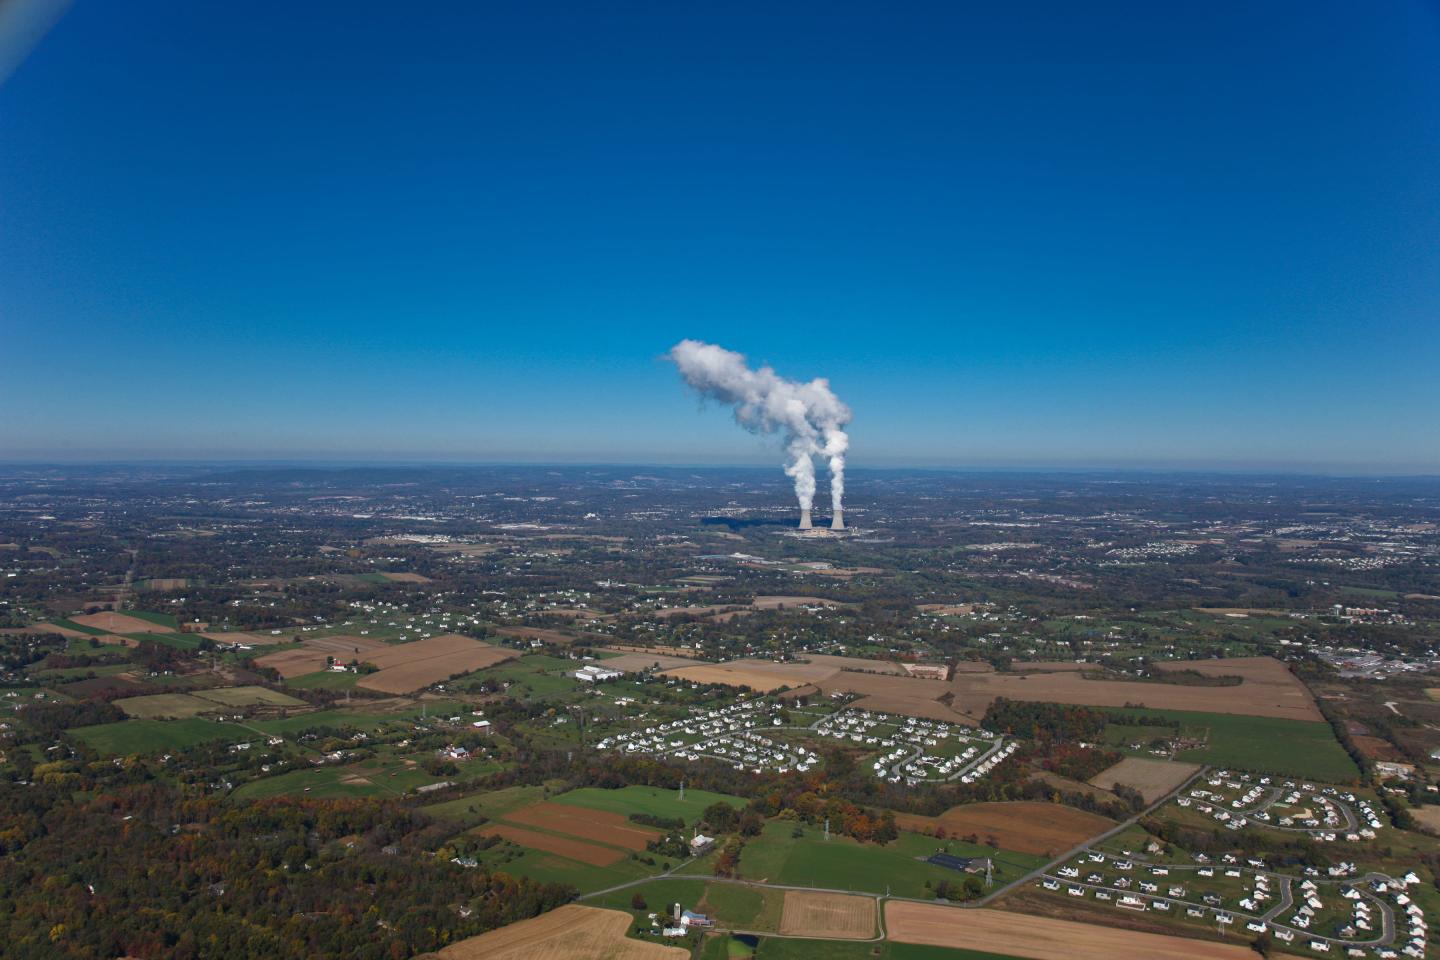 A high up shot of Pennsylvania with two plumes of smoke coming out of a power plant in the distance